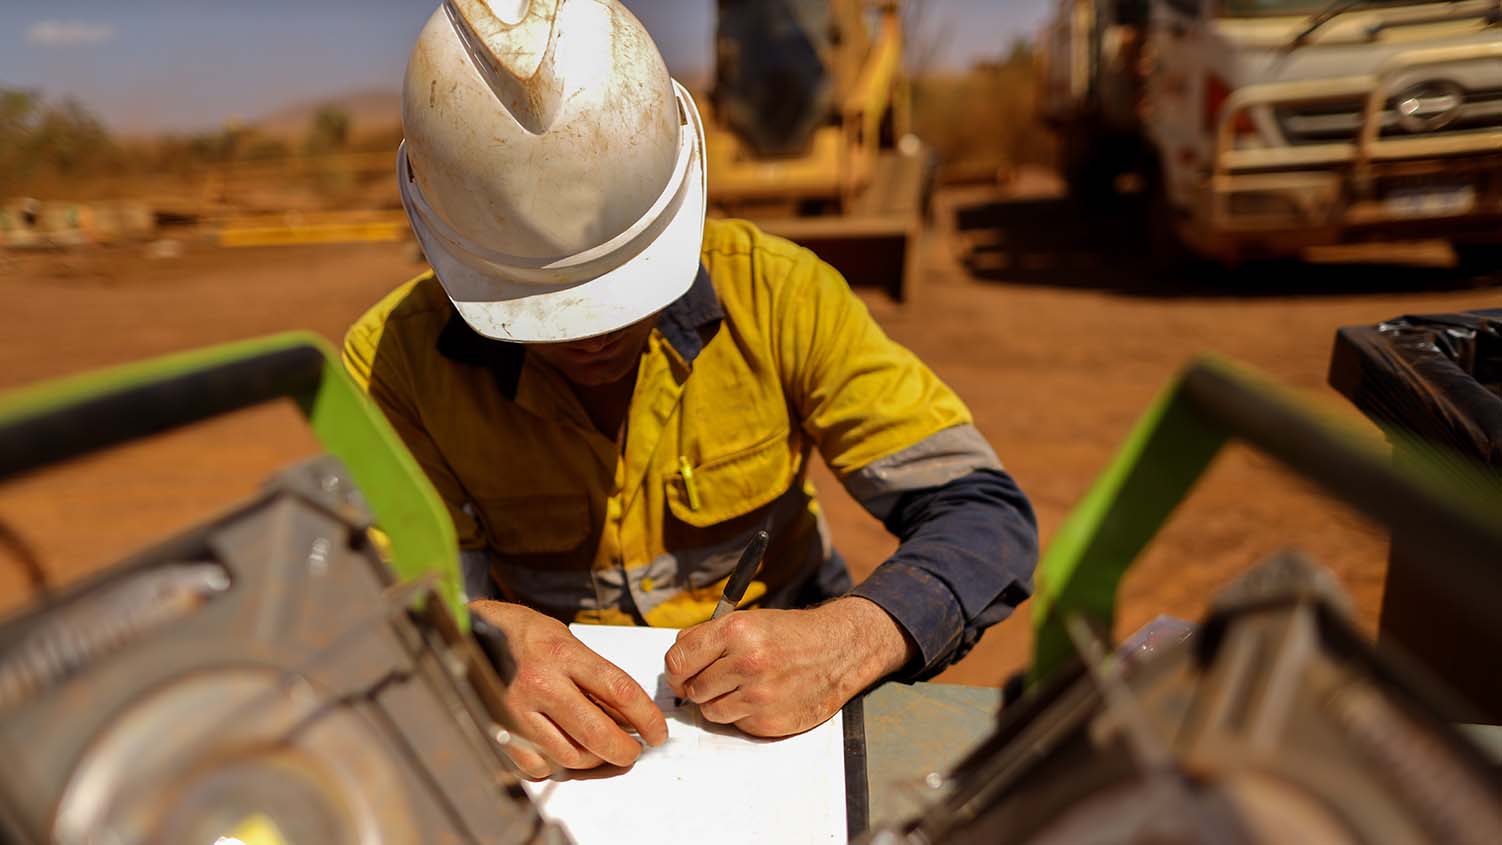 image shows a worker at a jobsite wearing a hard hat and writing on a clipboard